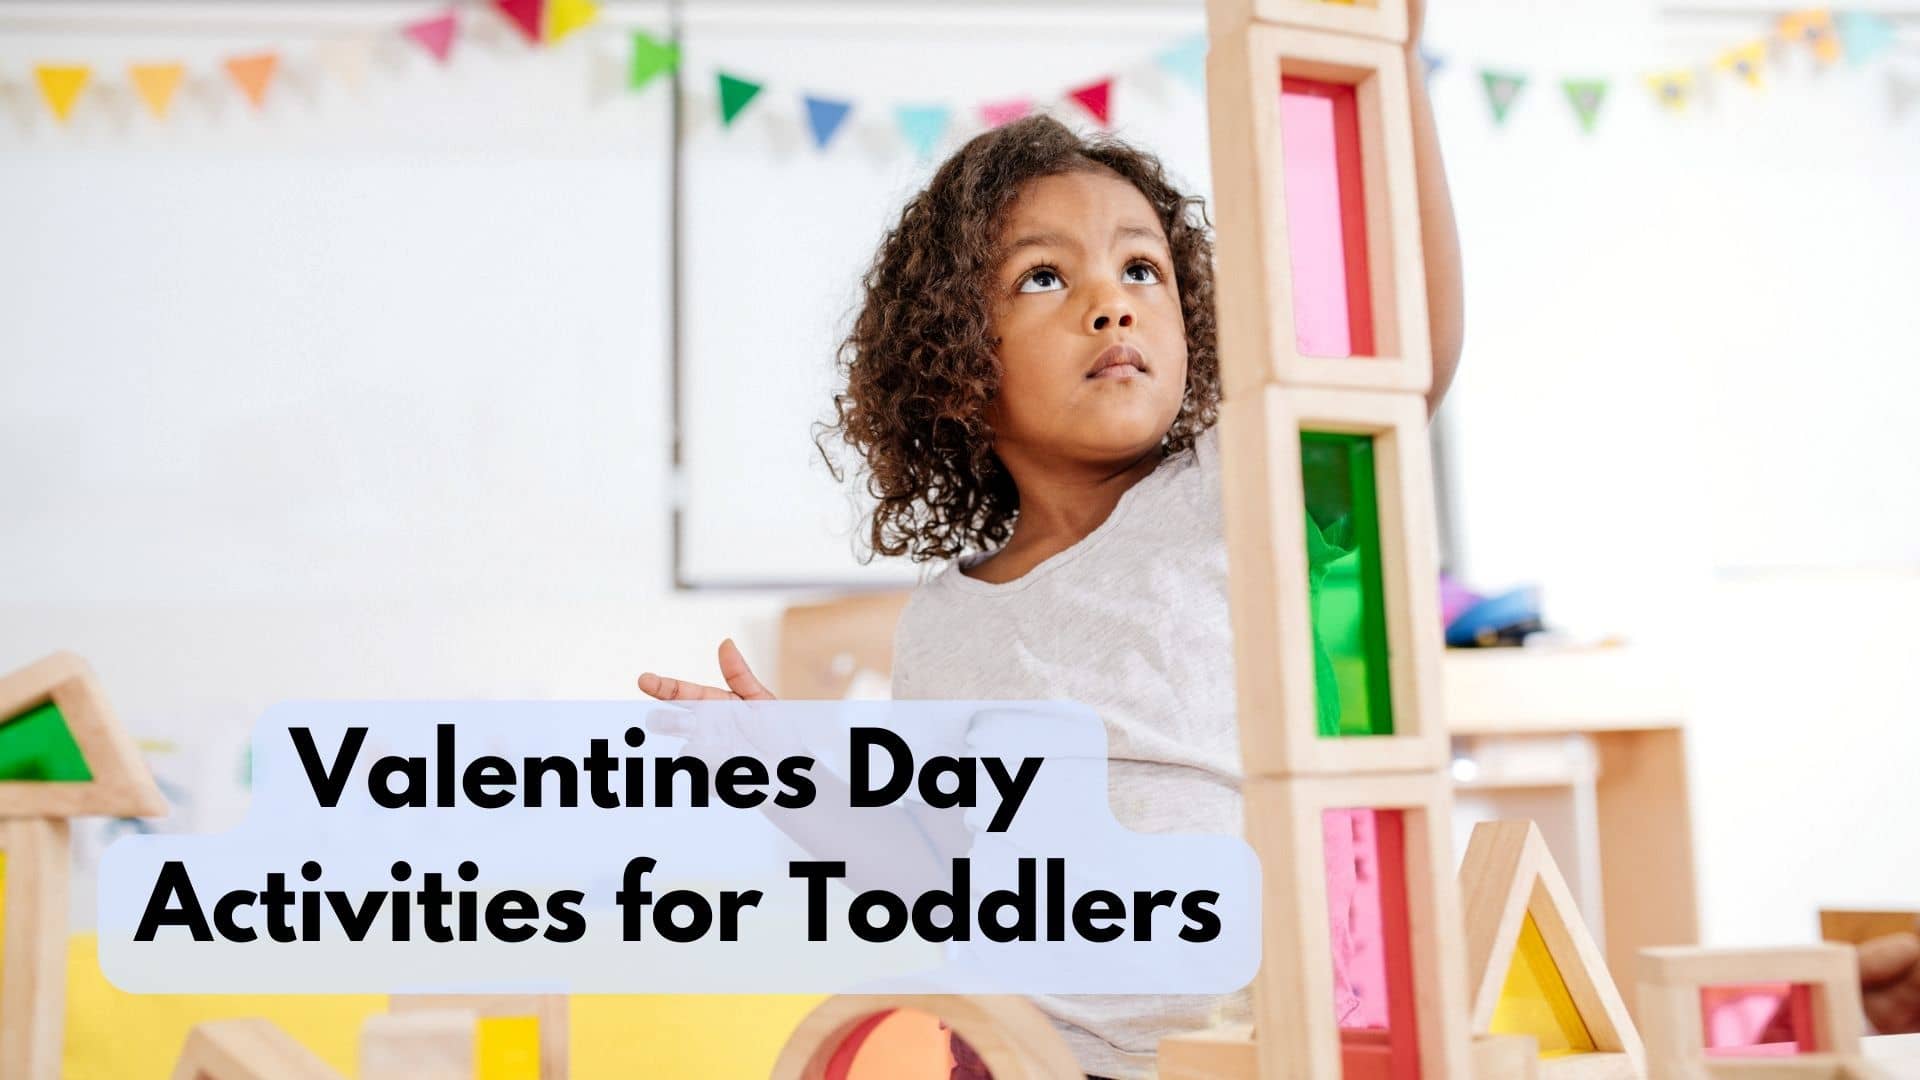 Valentines Day Activities for Toddlers